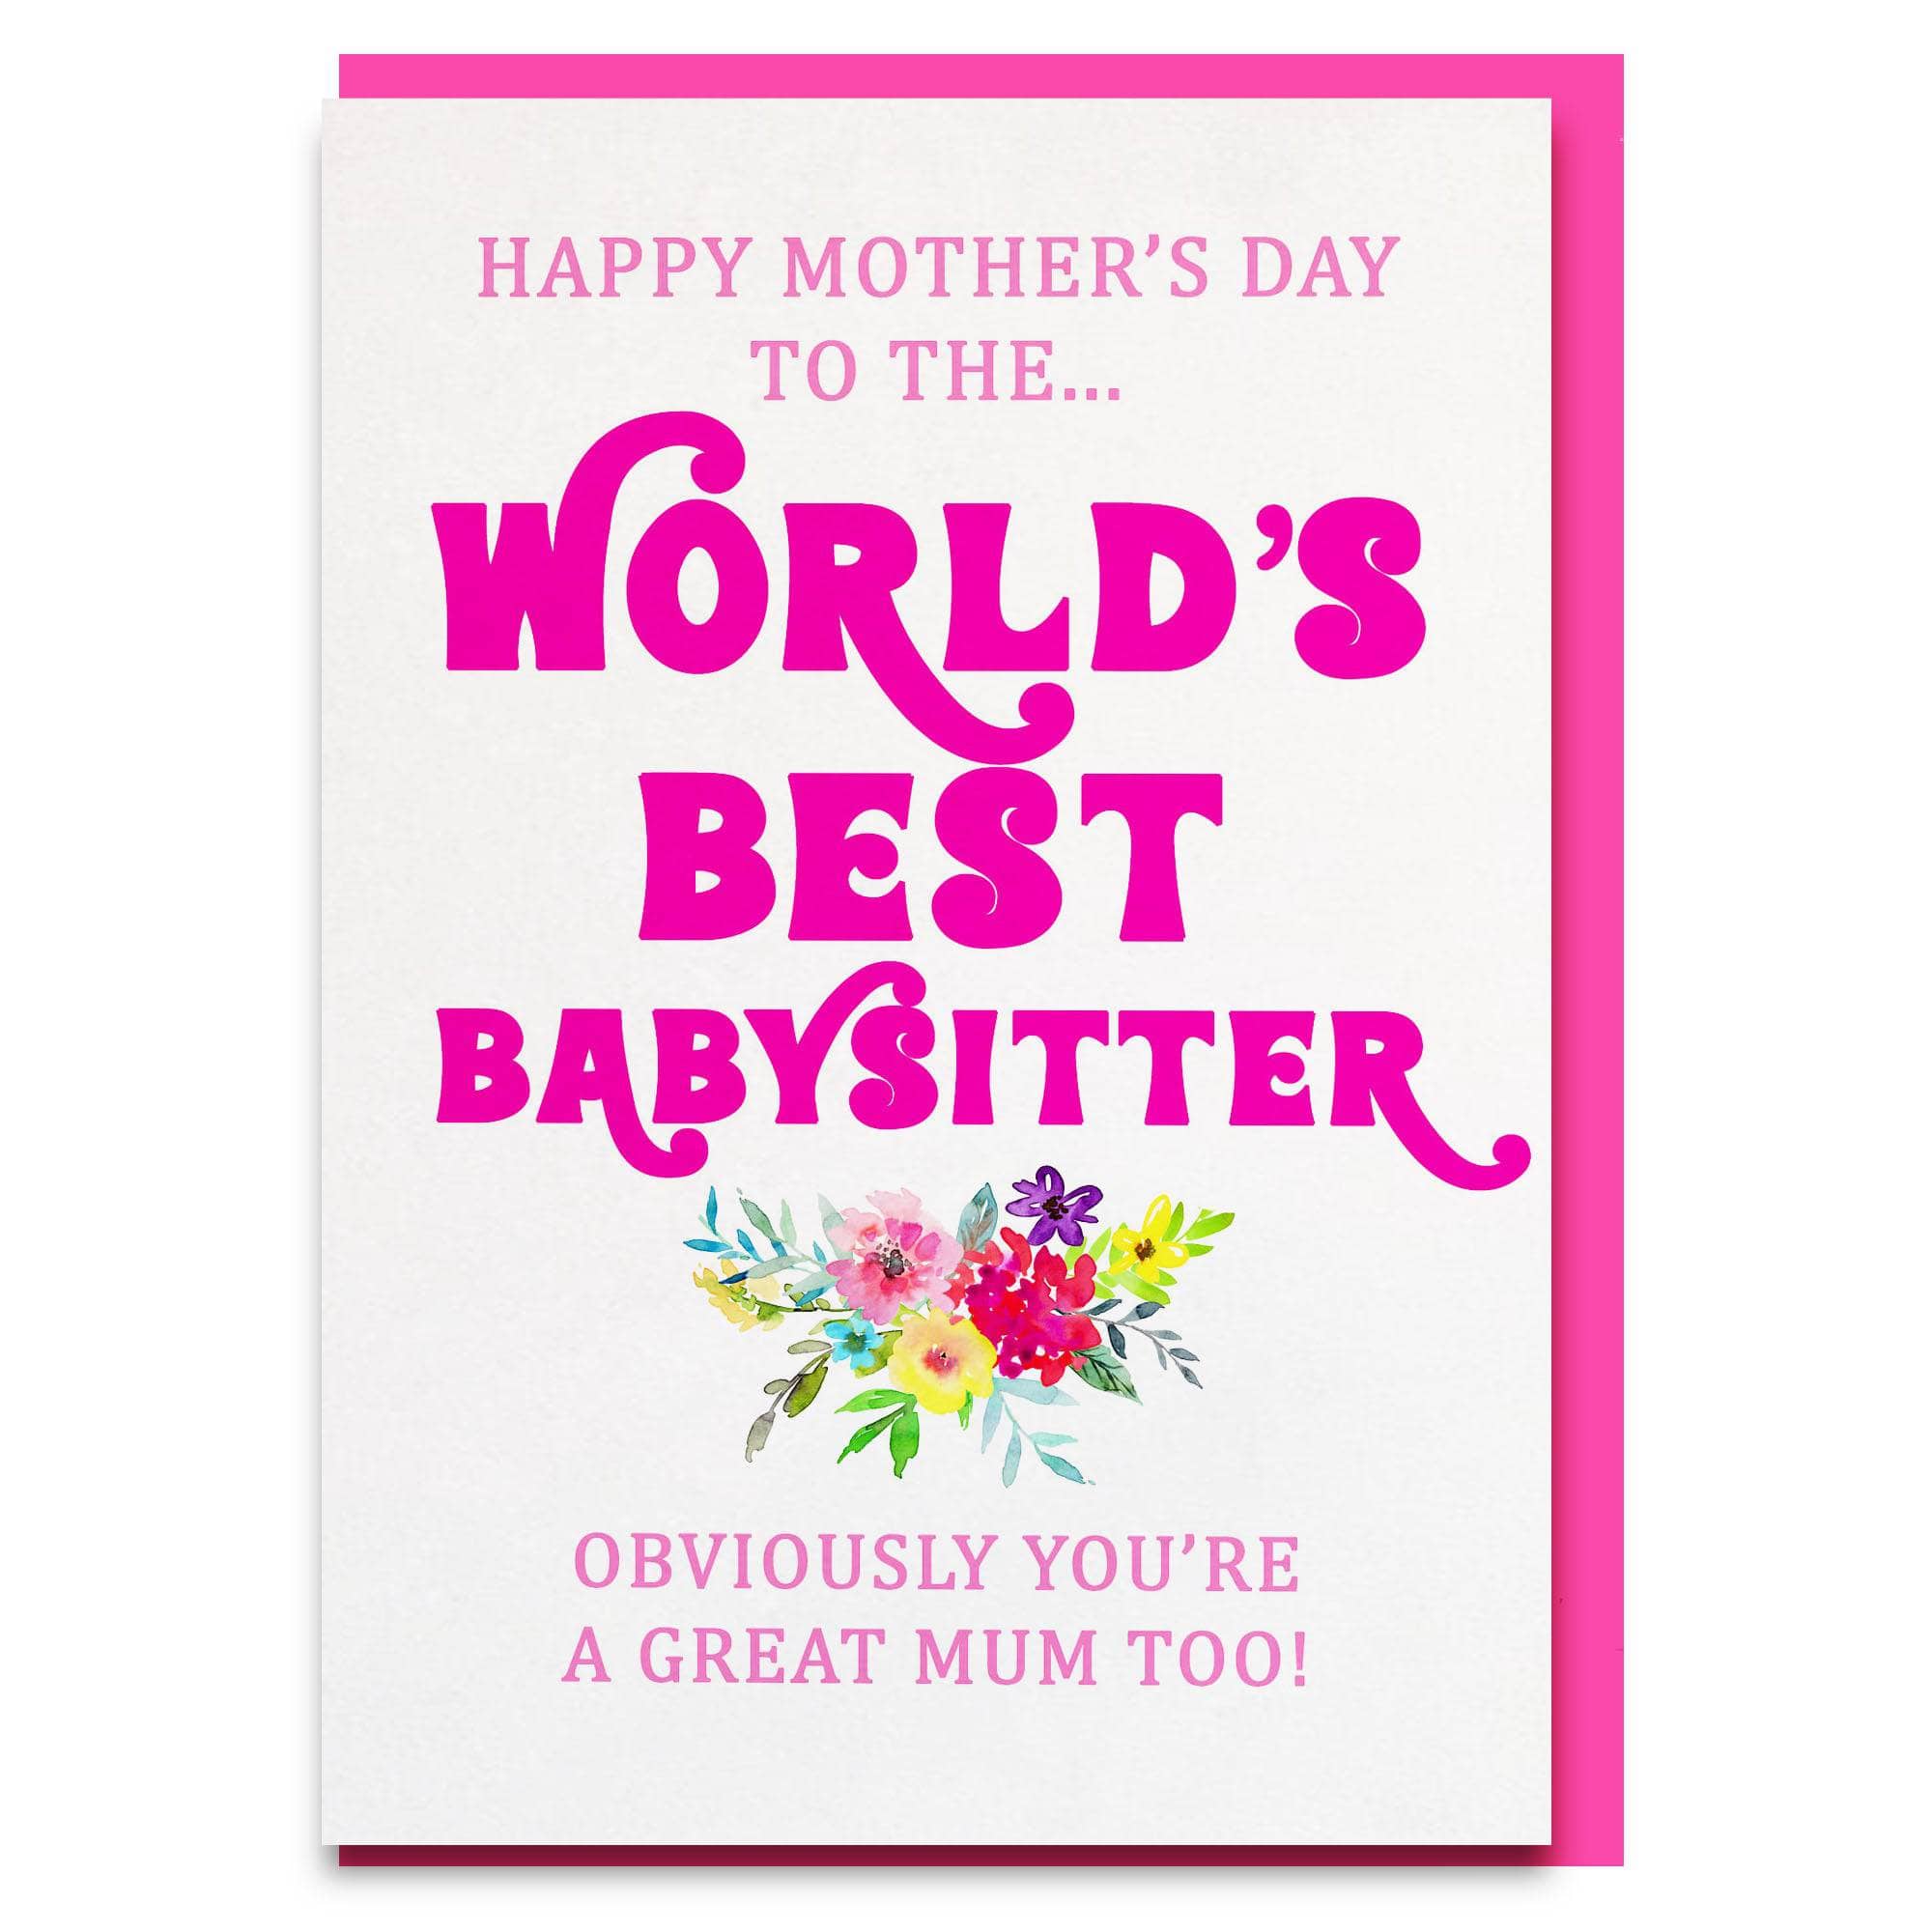 funny thanks for babysitting mothers day card